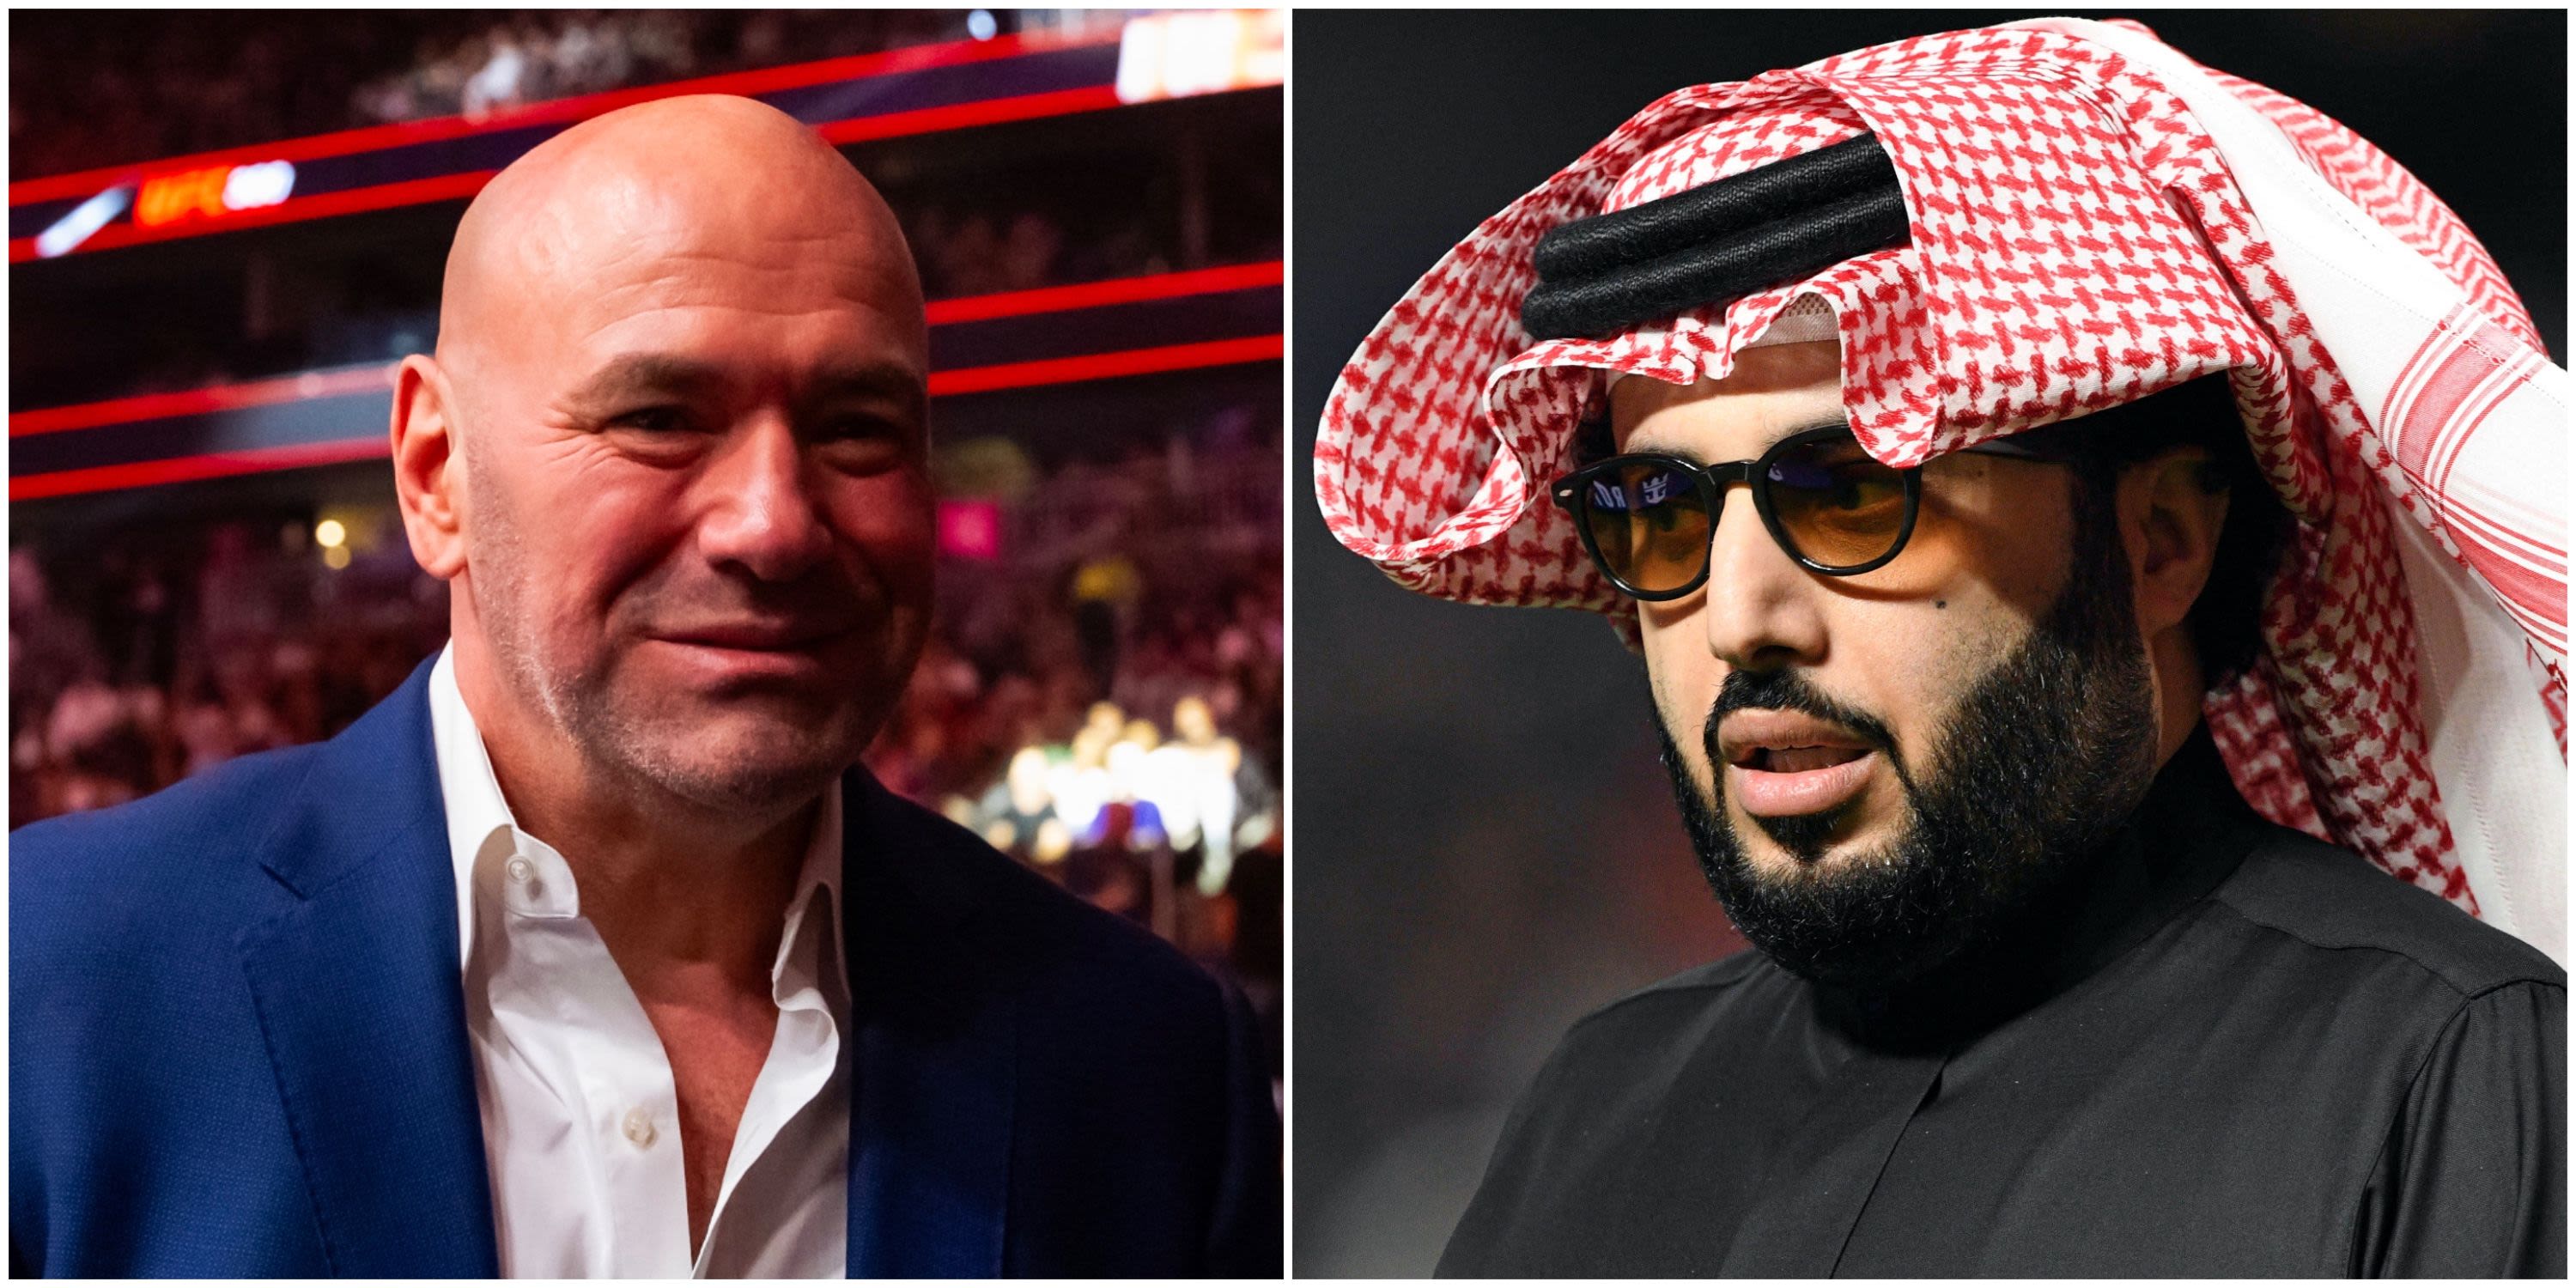 Turki Alalshikh is taking over boxing and on Tuesday strengthens his ties with the UFC and Dana White in a new deal.